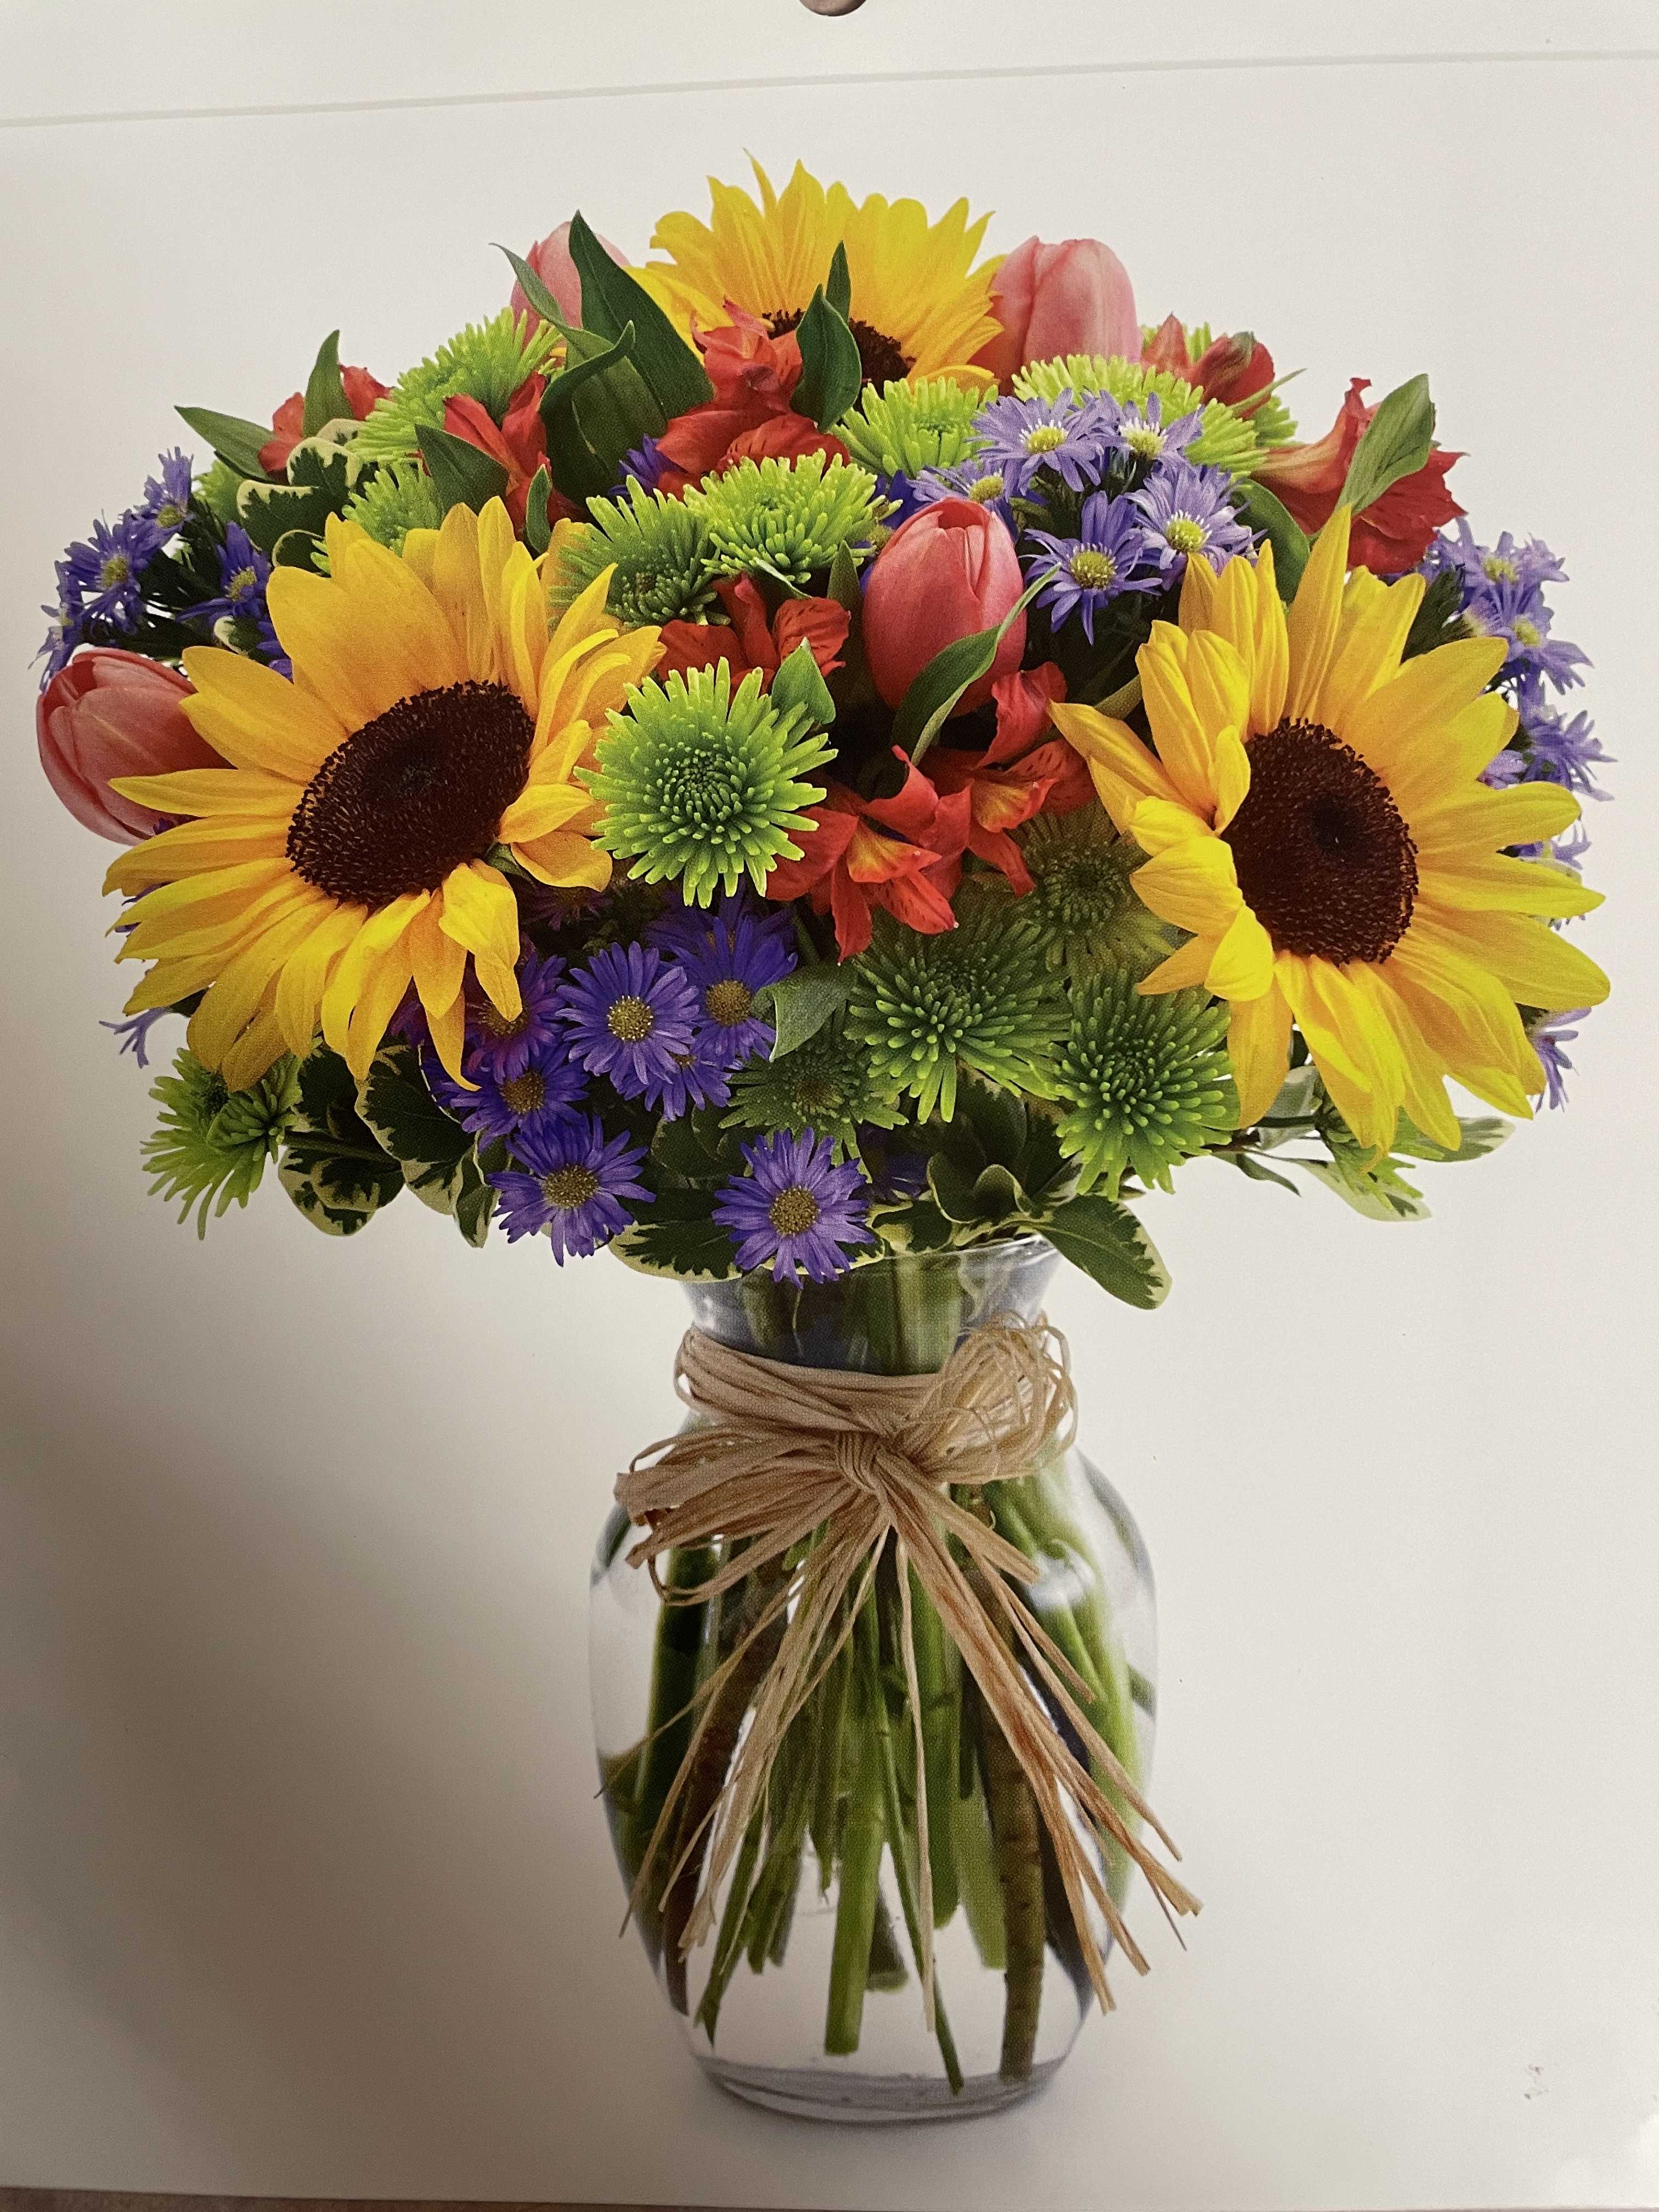 Daisy Garden - This beautiful bouquet is ideal for Grandparents, bosses, Cinco de Mayo, or other occasions. Contains: Sunflowers, tulips, alstroemeria, green buttons, Chester daisy, and foliage.  Standard price is 59.99.  Note:  Out of season flowers will be substituted.  It can be cutom made.  Custom made prices will vary.  For custom made orders, call the store.  